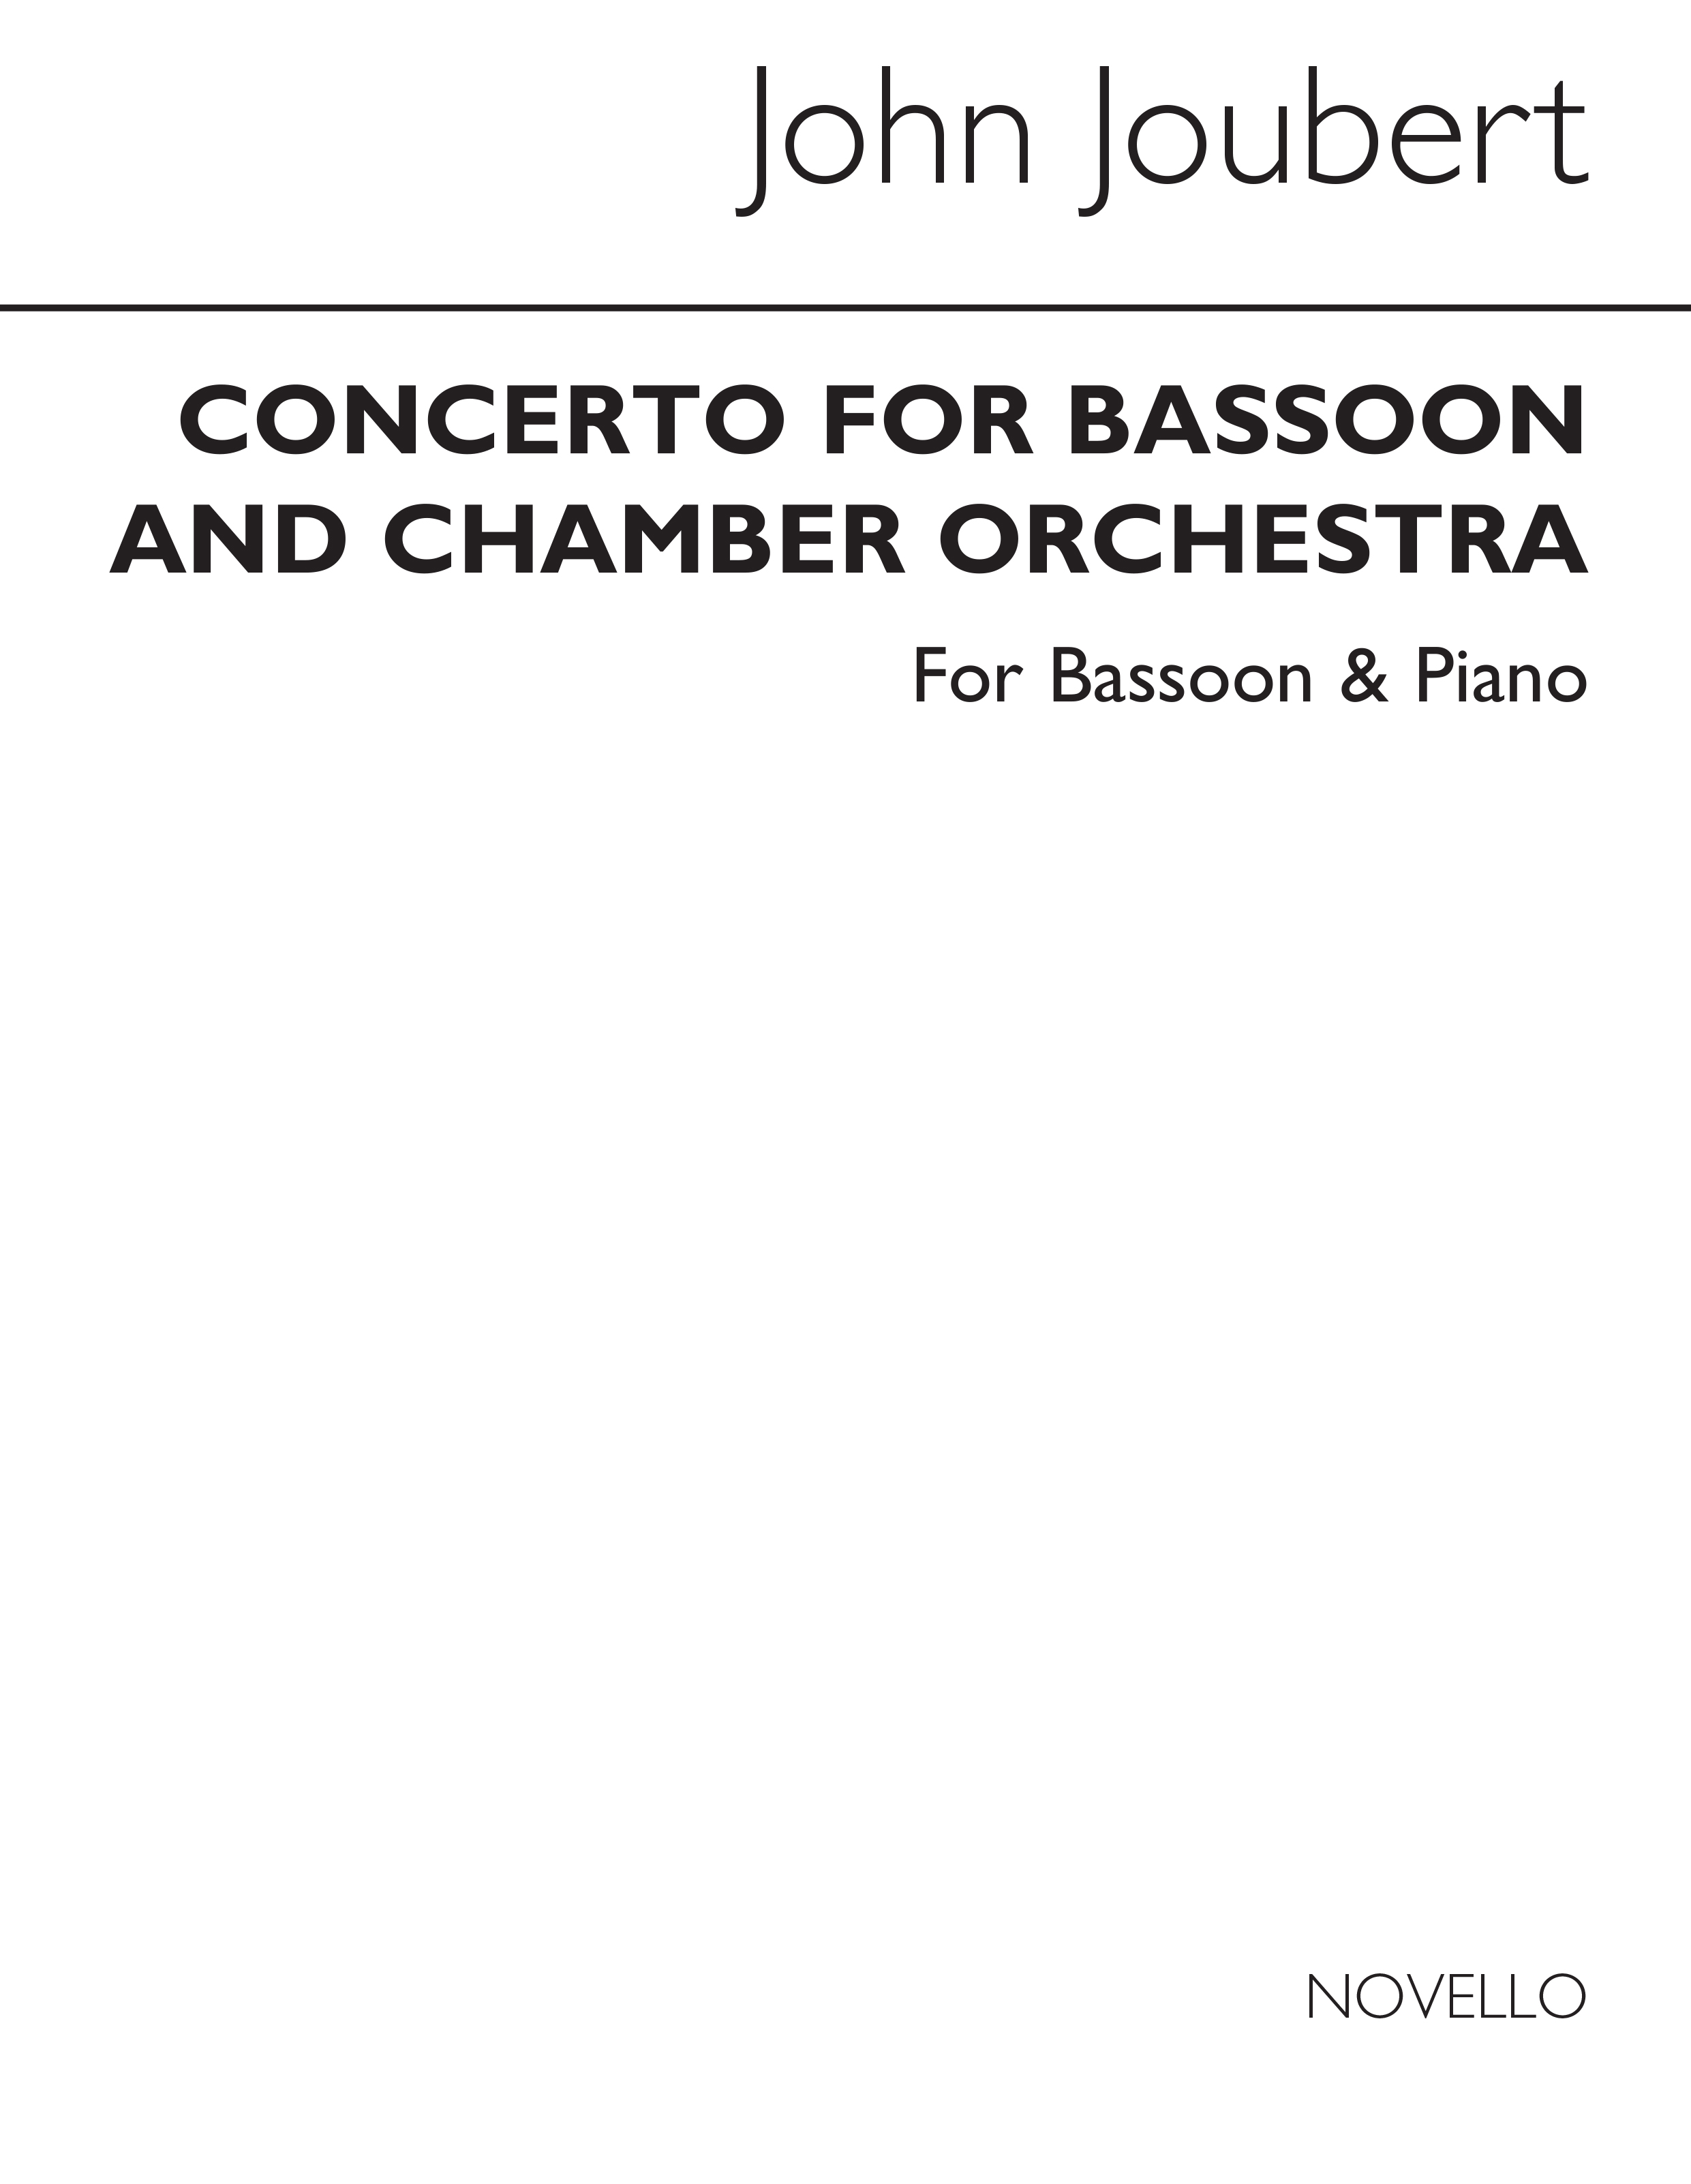 Joubert: Concerto For Bassoon (With Piano Reduction)